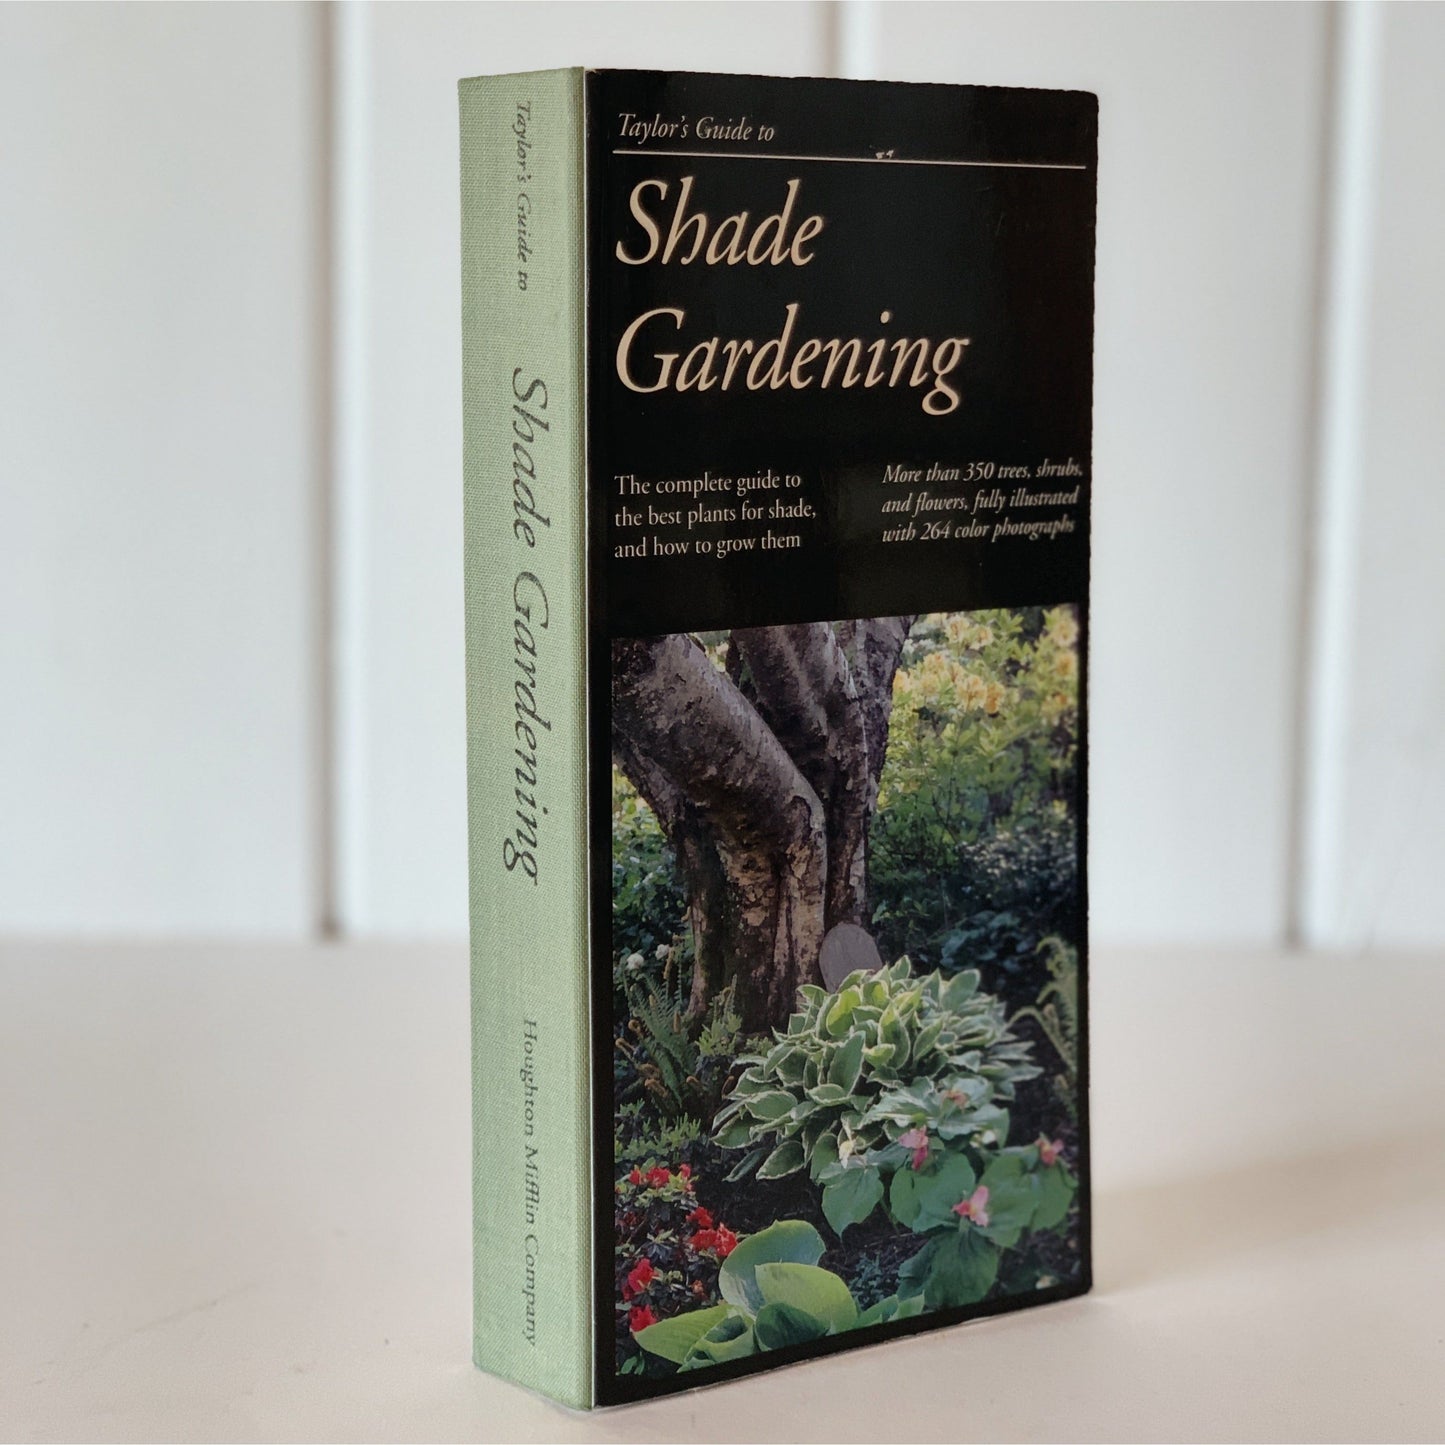 Taylor's Guide to Shade Gardening, 1994